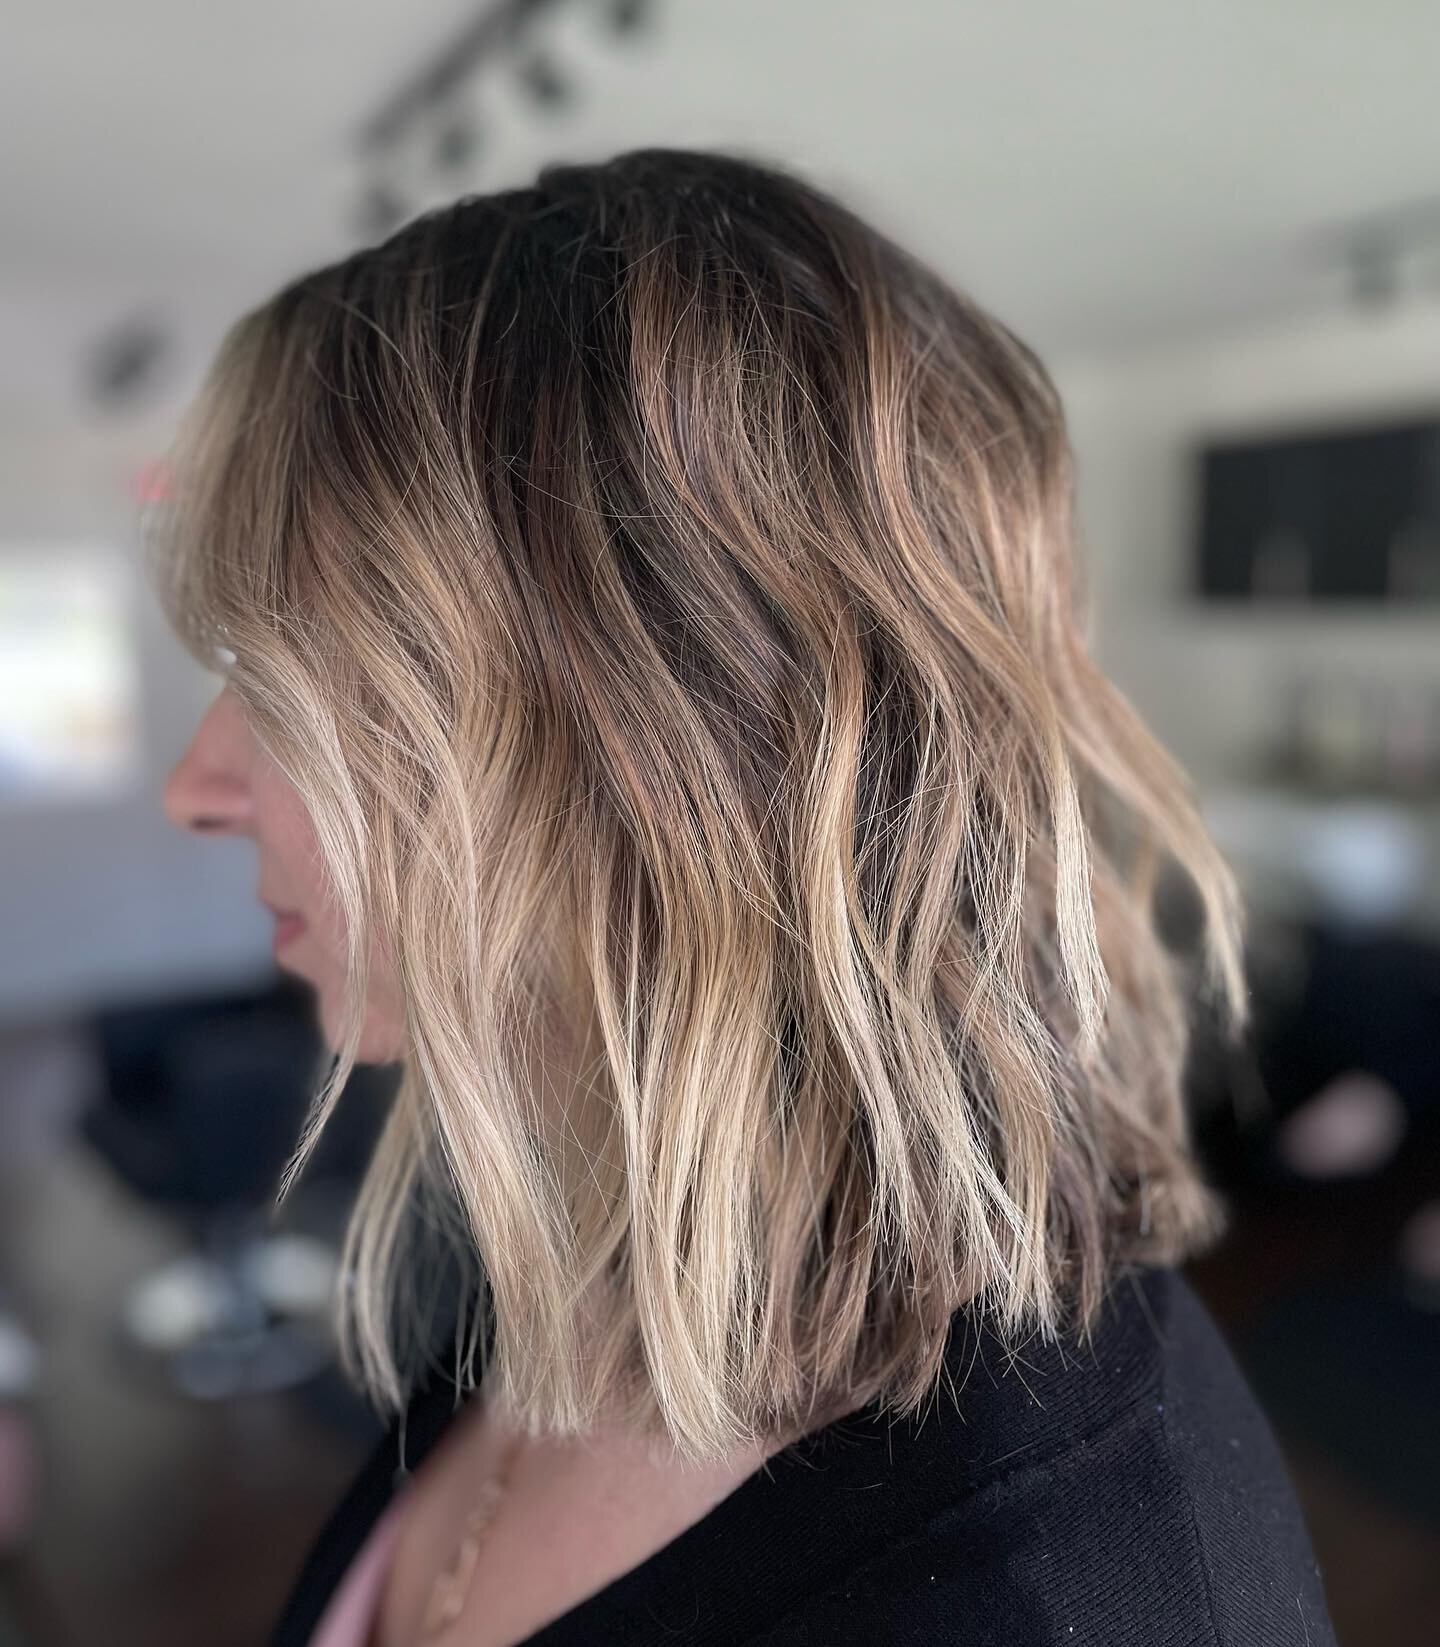 It was time for a big change! Perfect start to the summer transition! 
&bull;
Swipe for before 📸
&bull;
#texturedbob #Lob #CtHairartist #farmingtonvalleyhair #CtLivedincolor